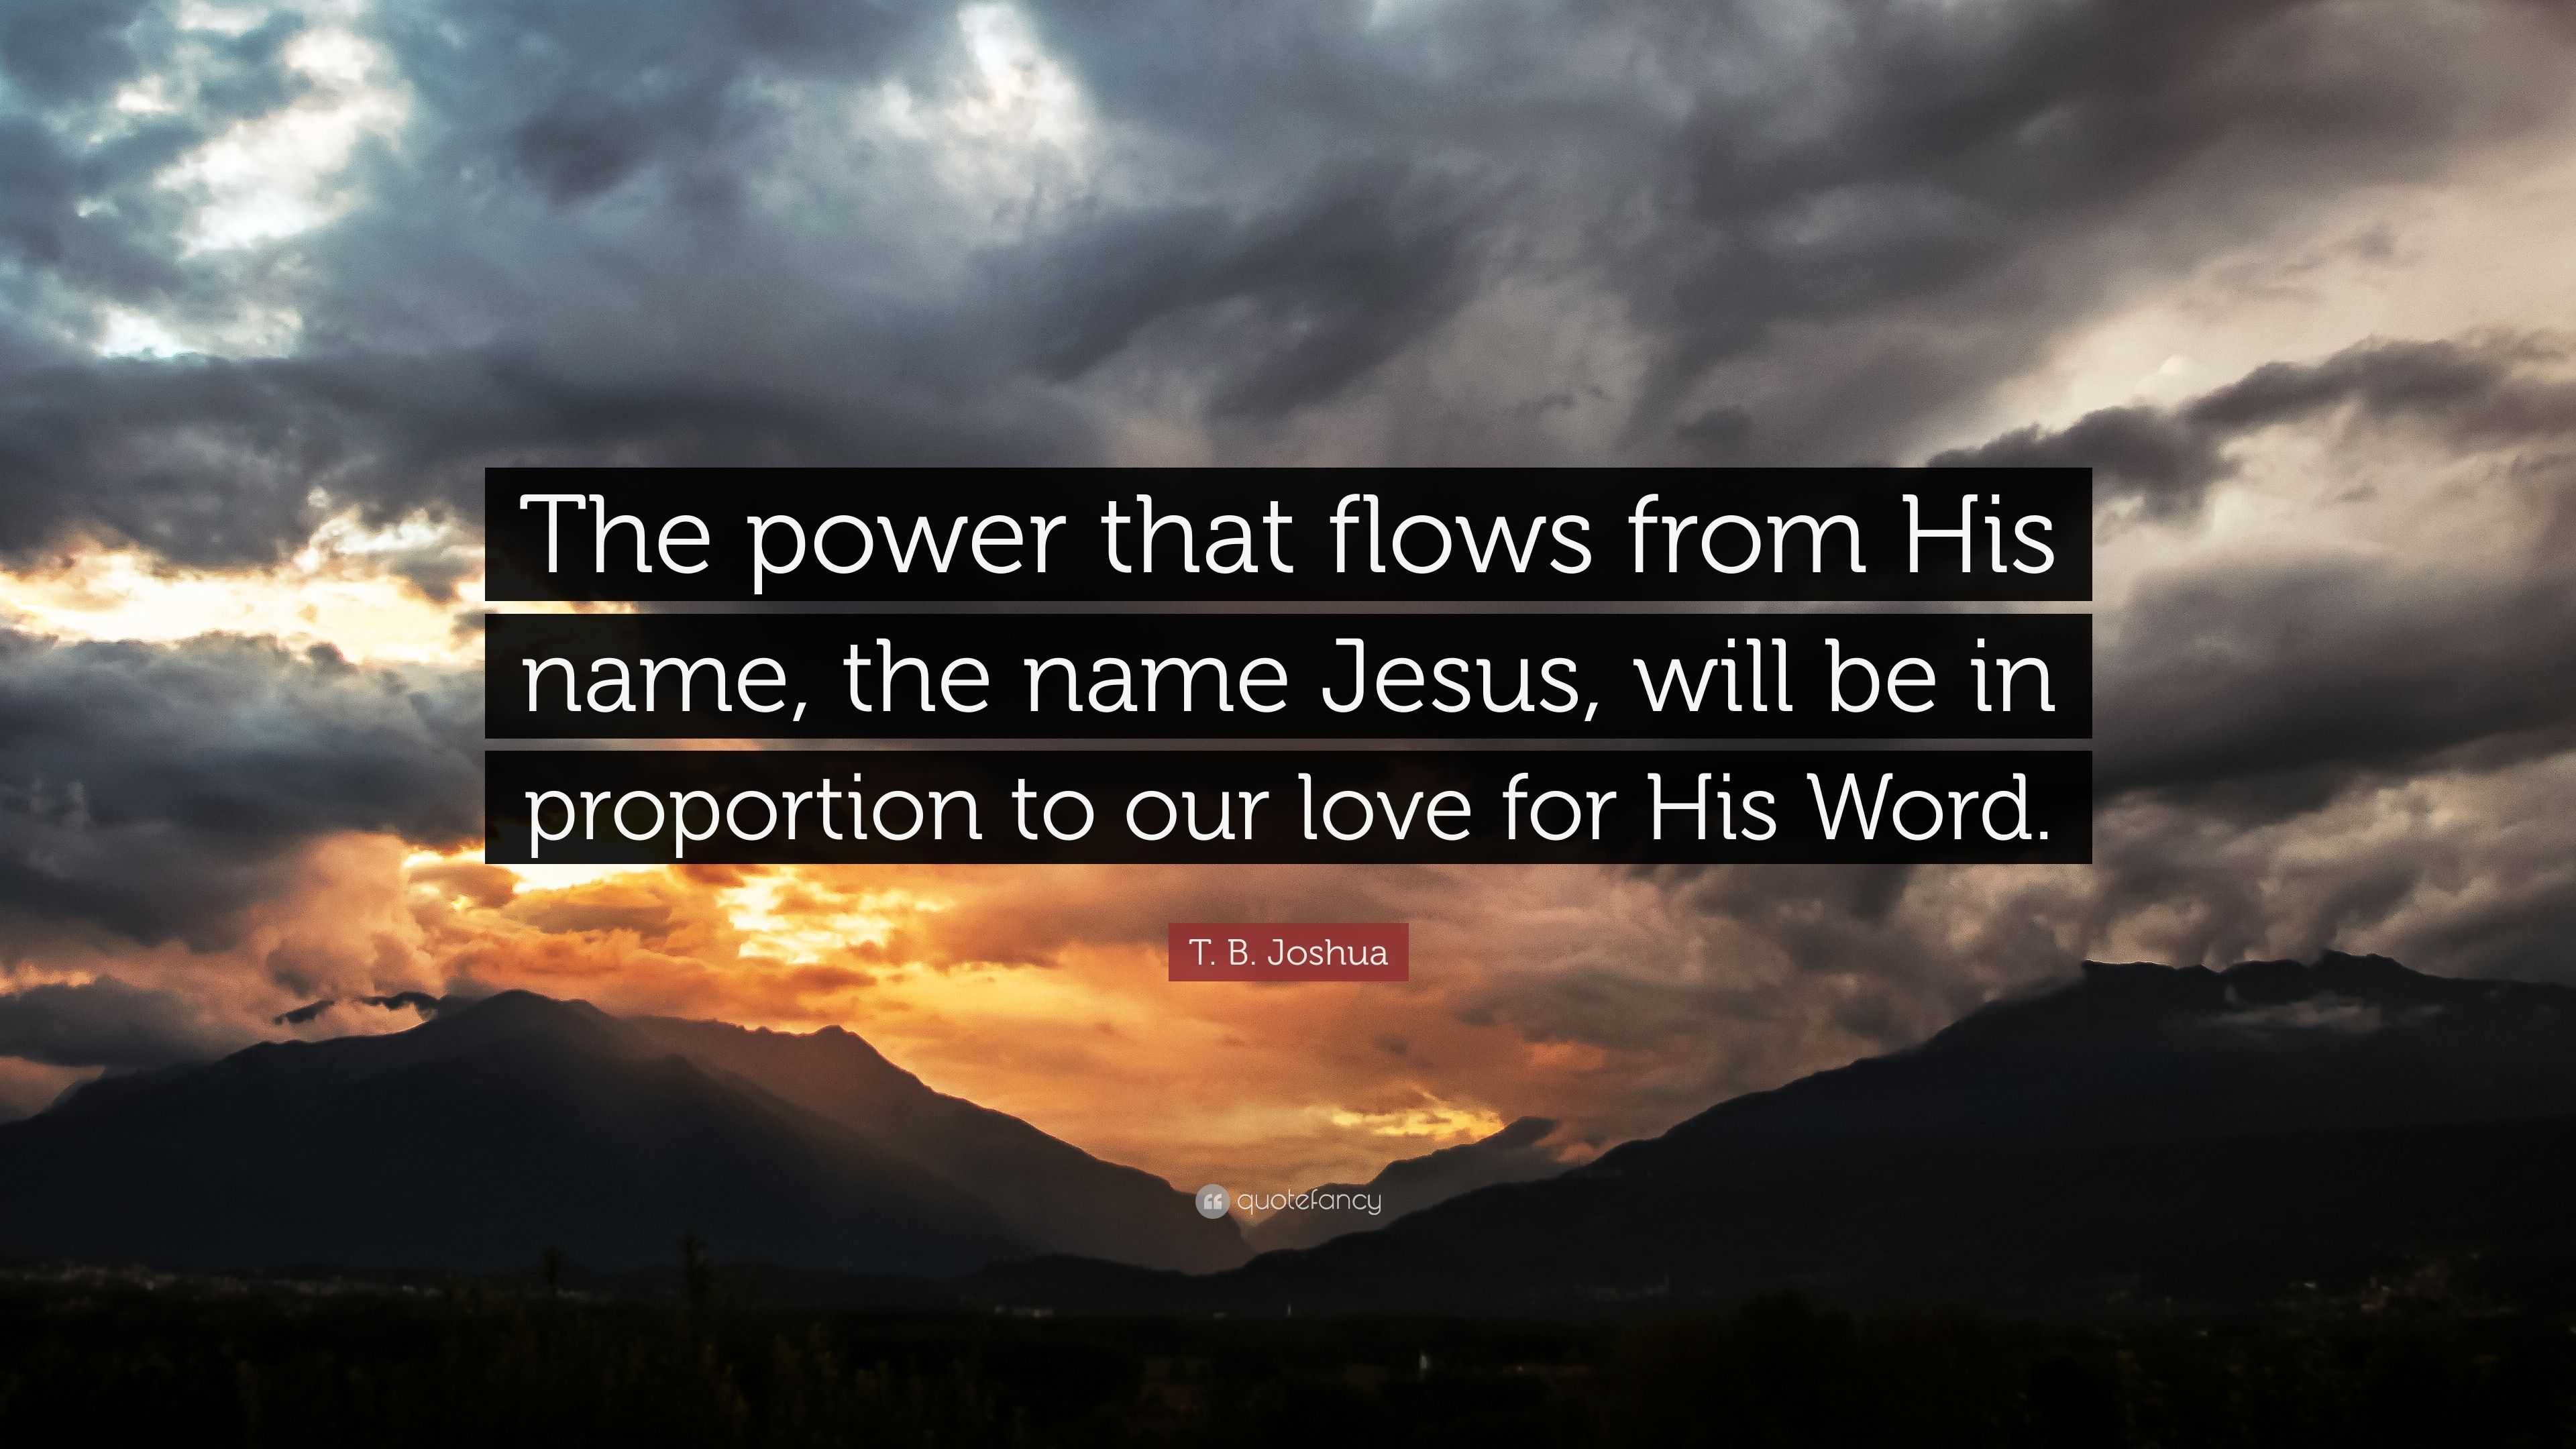 T. B. Joshua Quote: “The Power That Flows From His Name, The Name Jesus, Will Be In